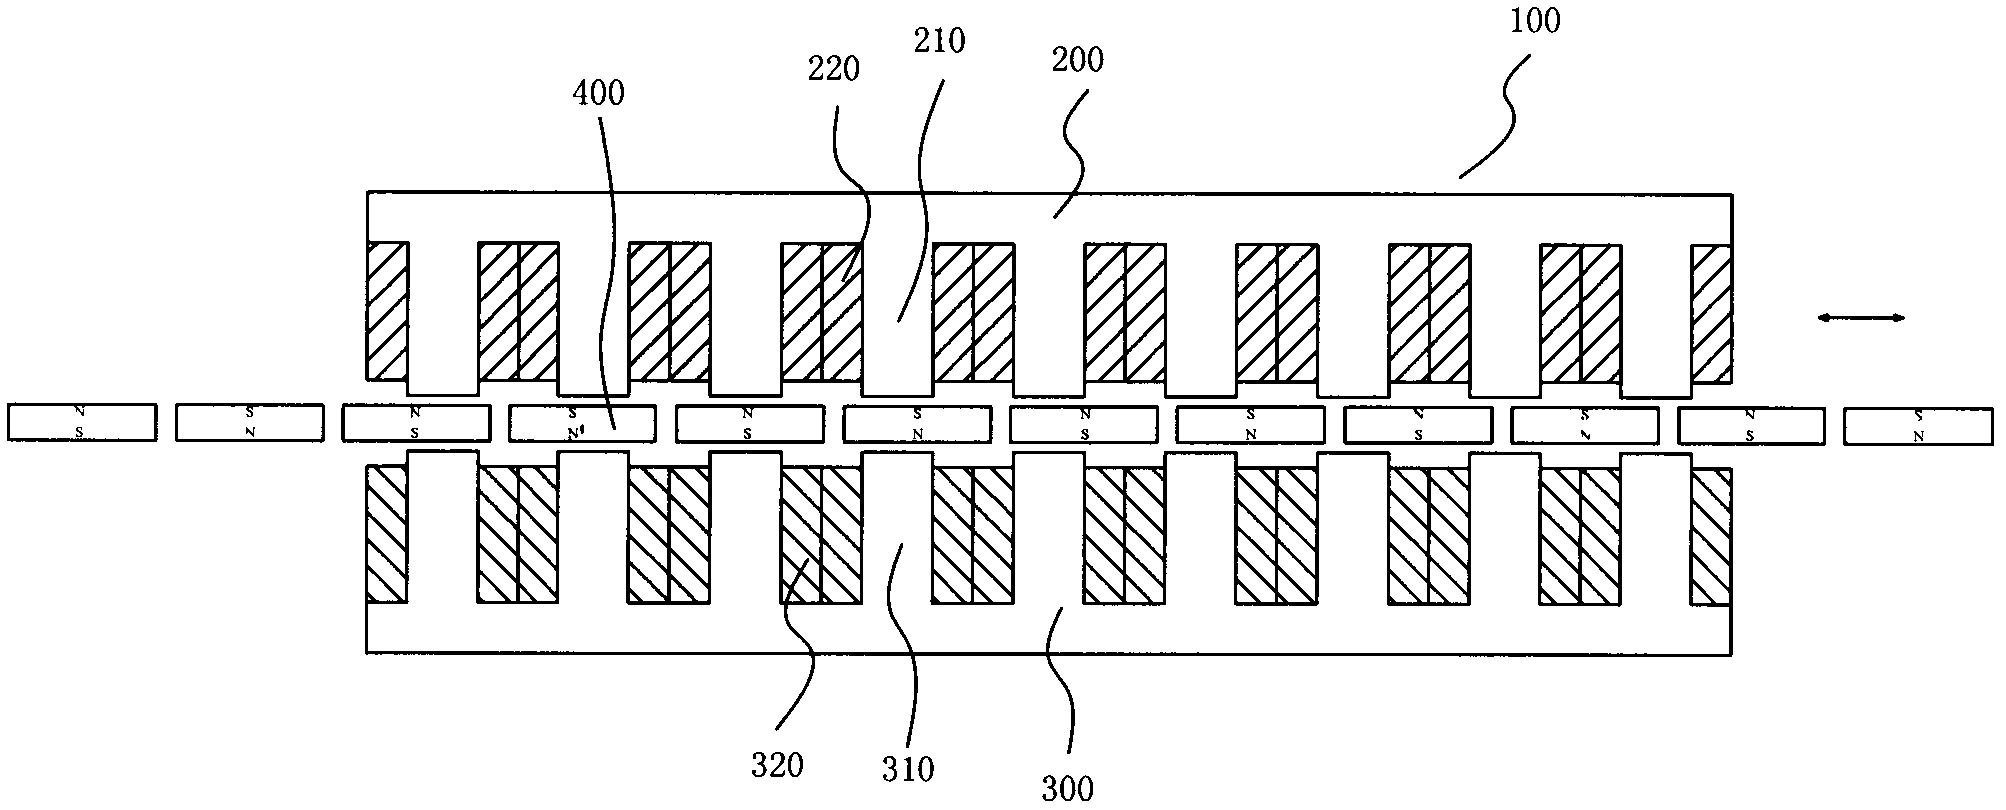 Linear motor capable of positioning load